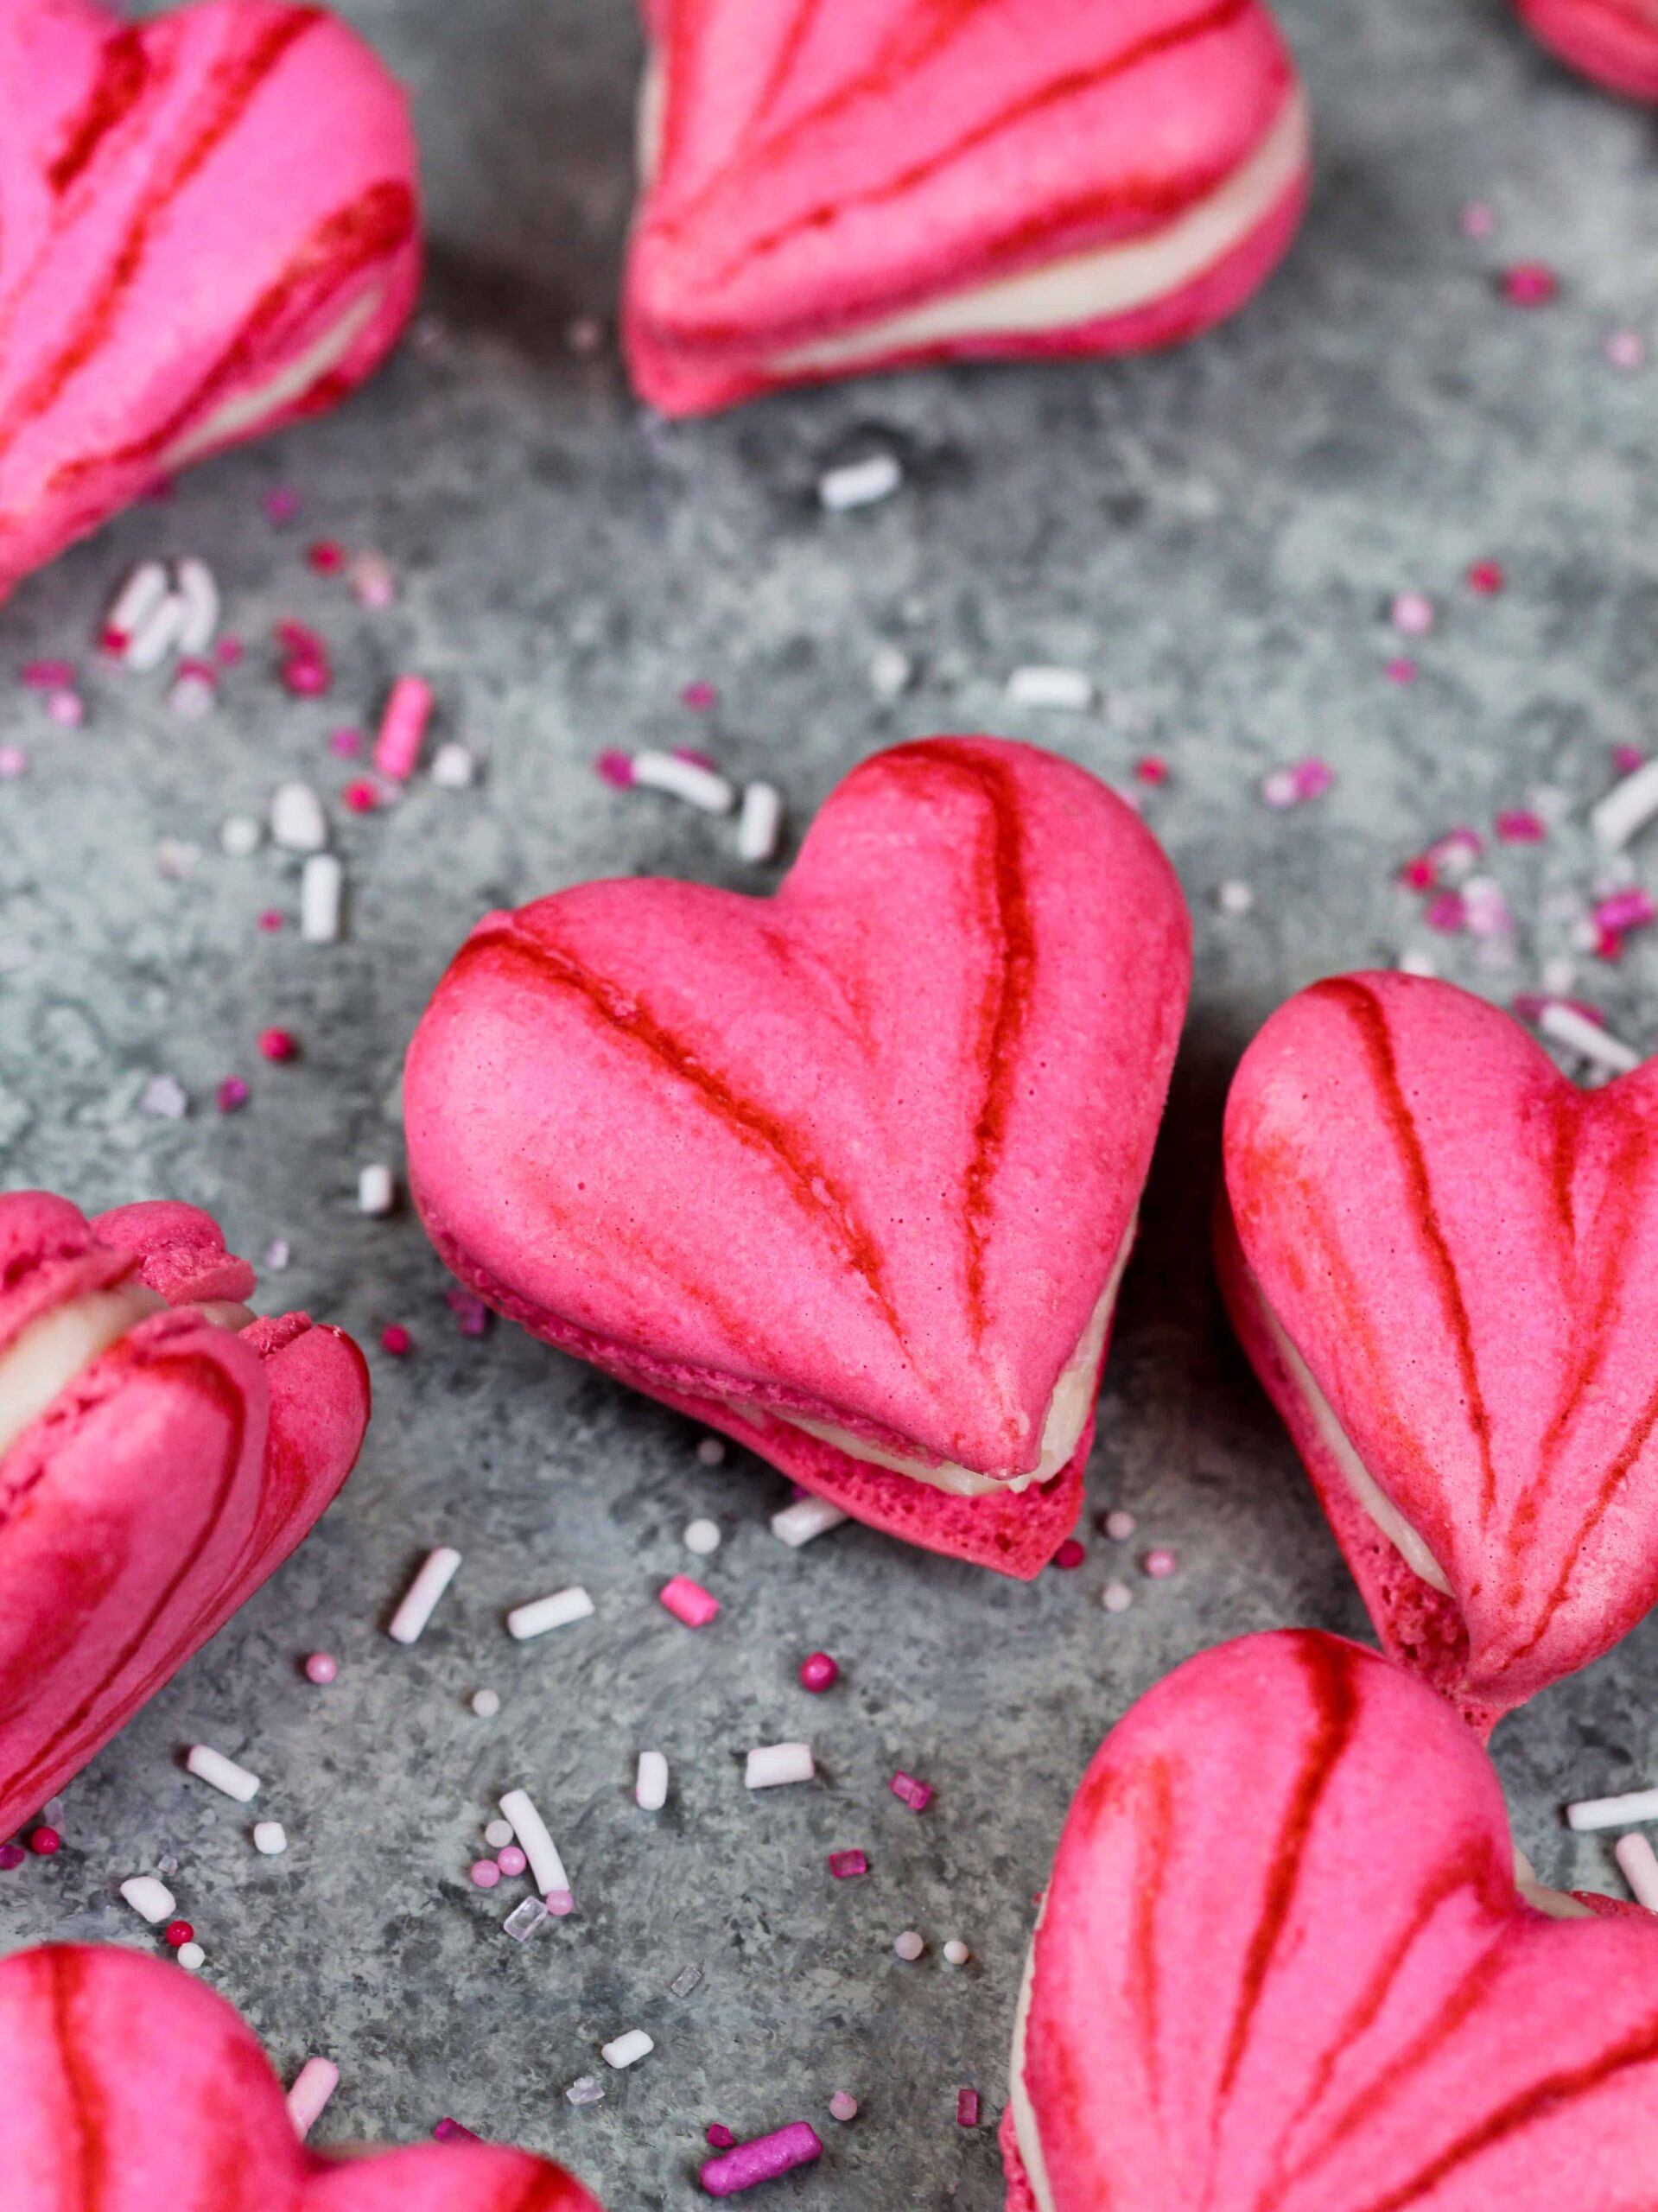 image of pink heart shaped macarons filled with buttercream that are shared as part of a macaron round up post